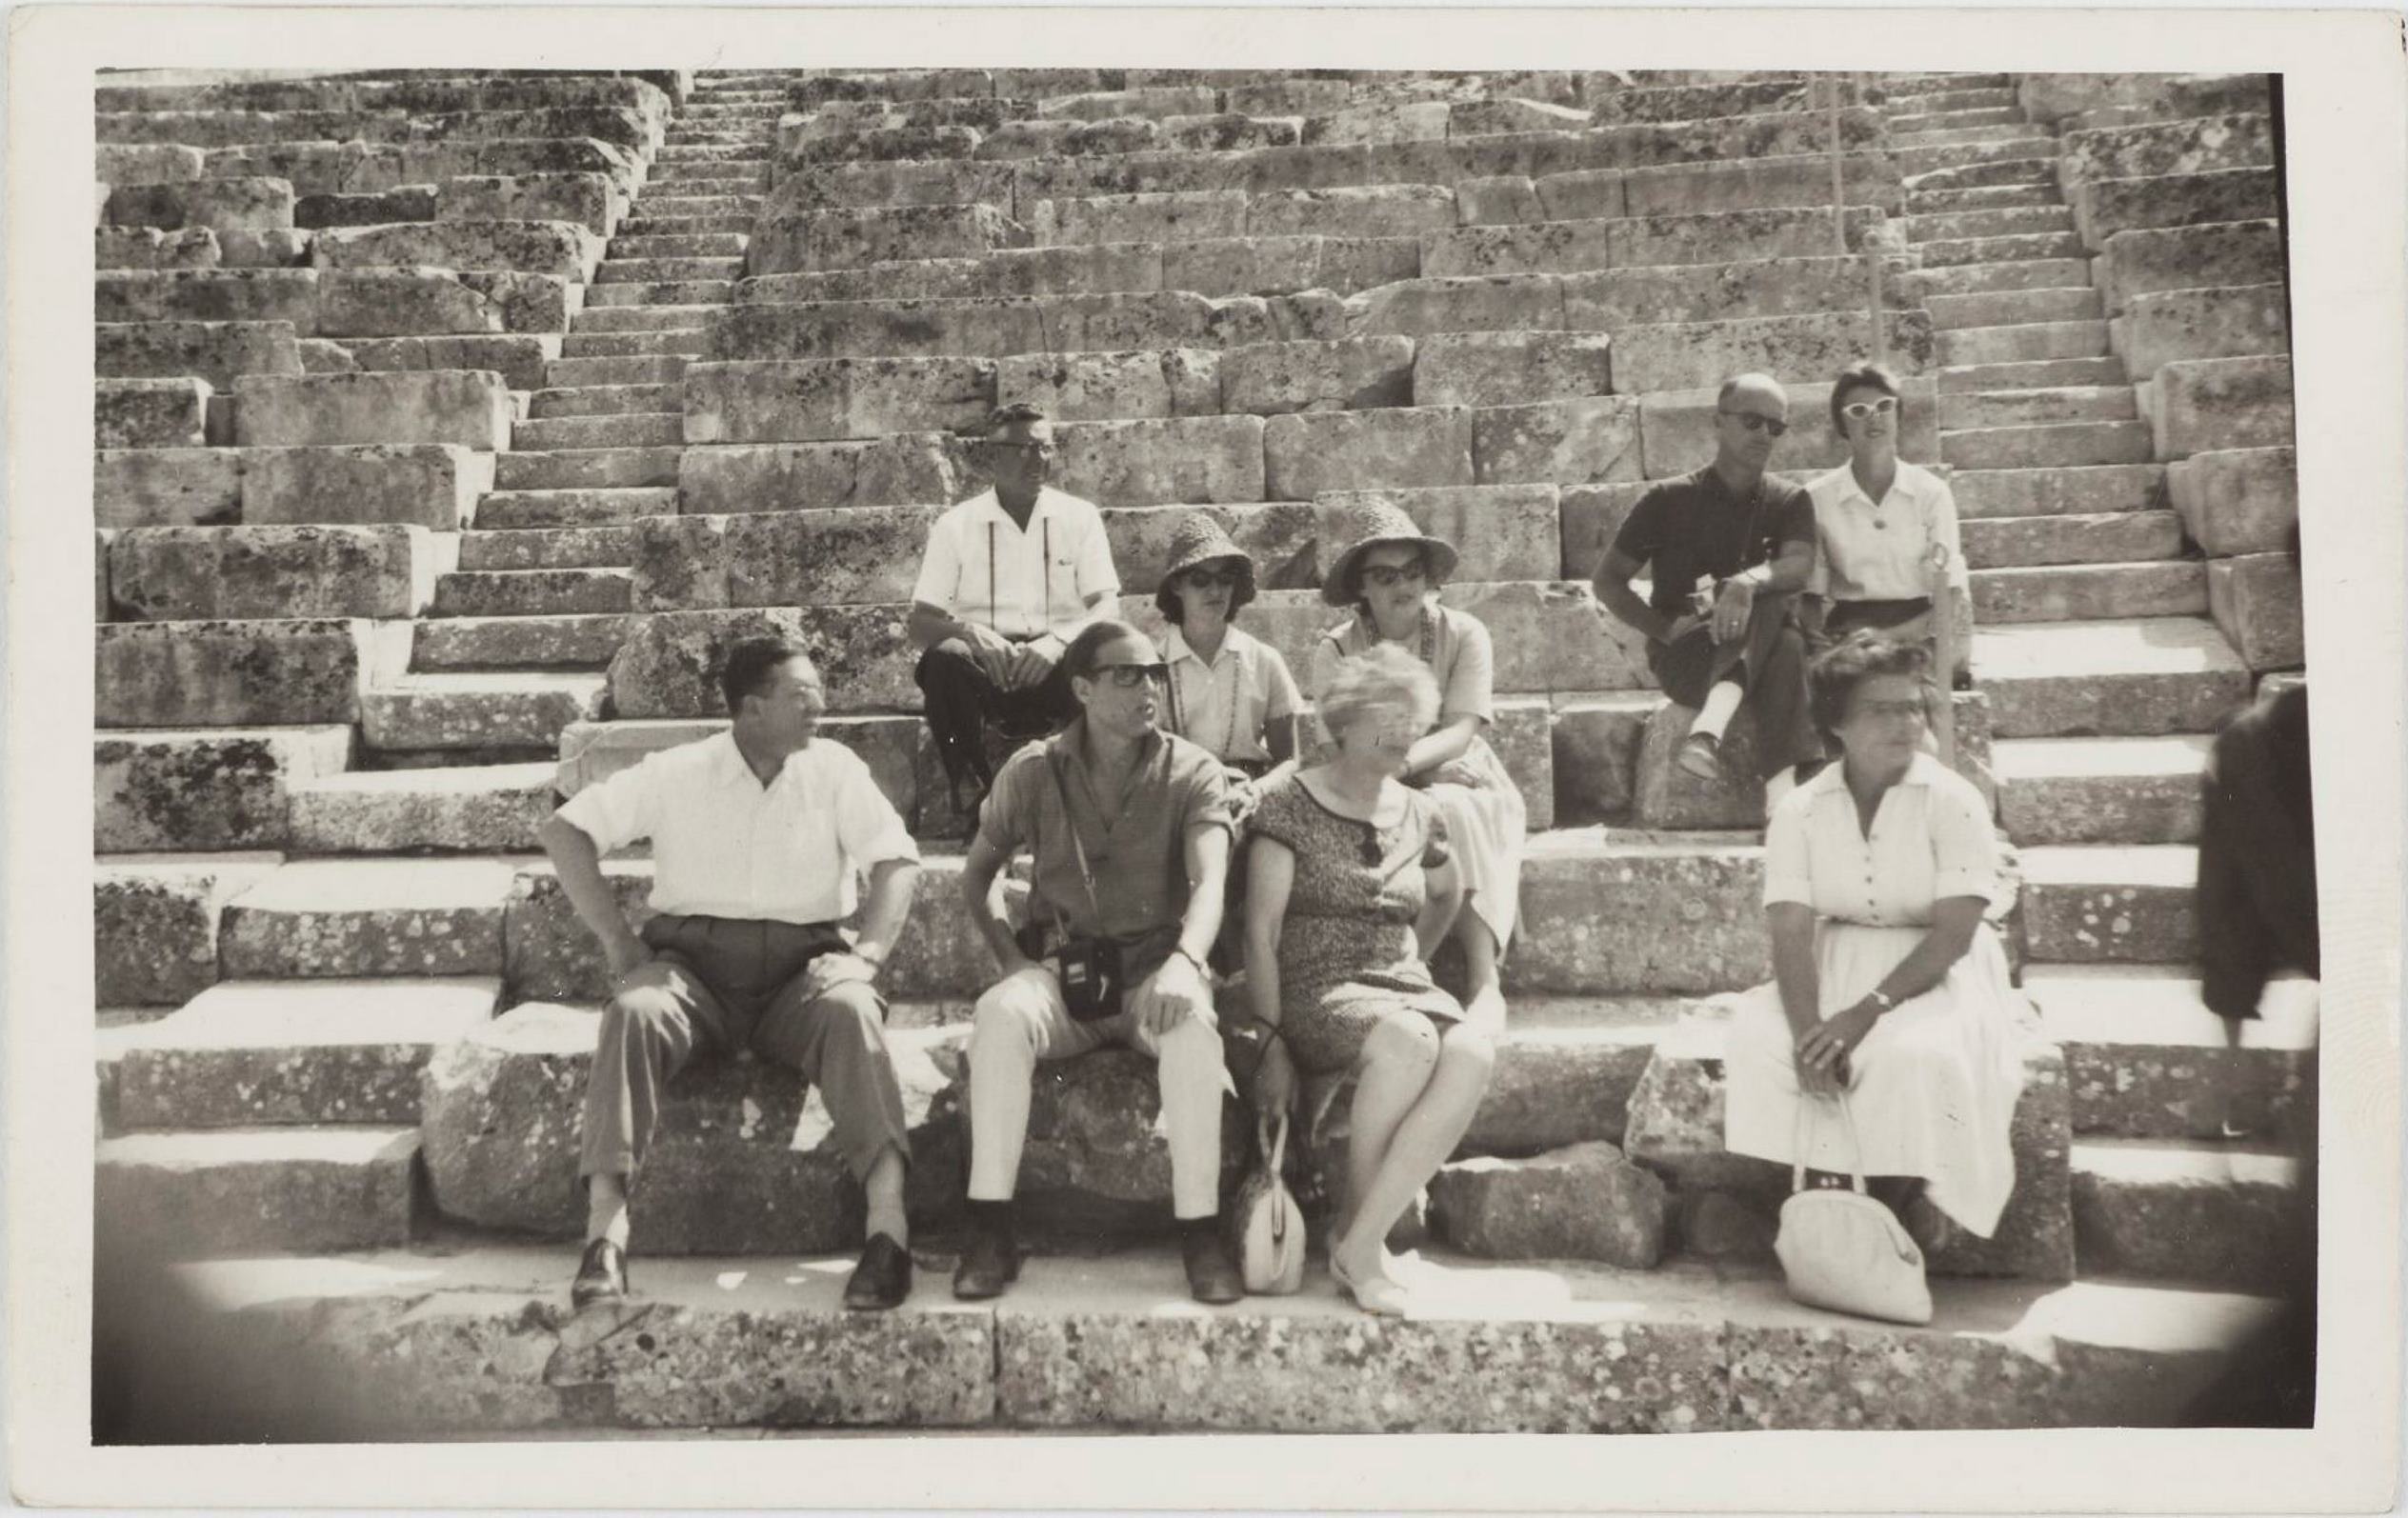 Leslie Walford and fellow tourists in an anceint amphitheatre, probably Epidaurus, Greece, July 1961 / photographer unknown